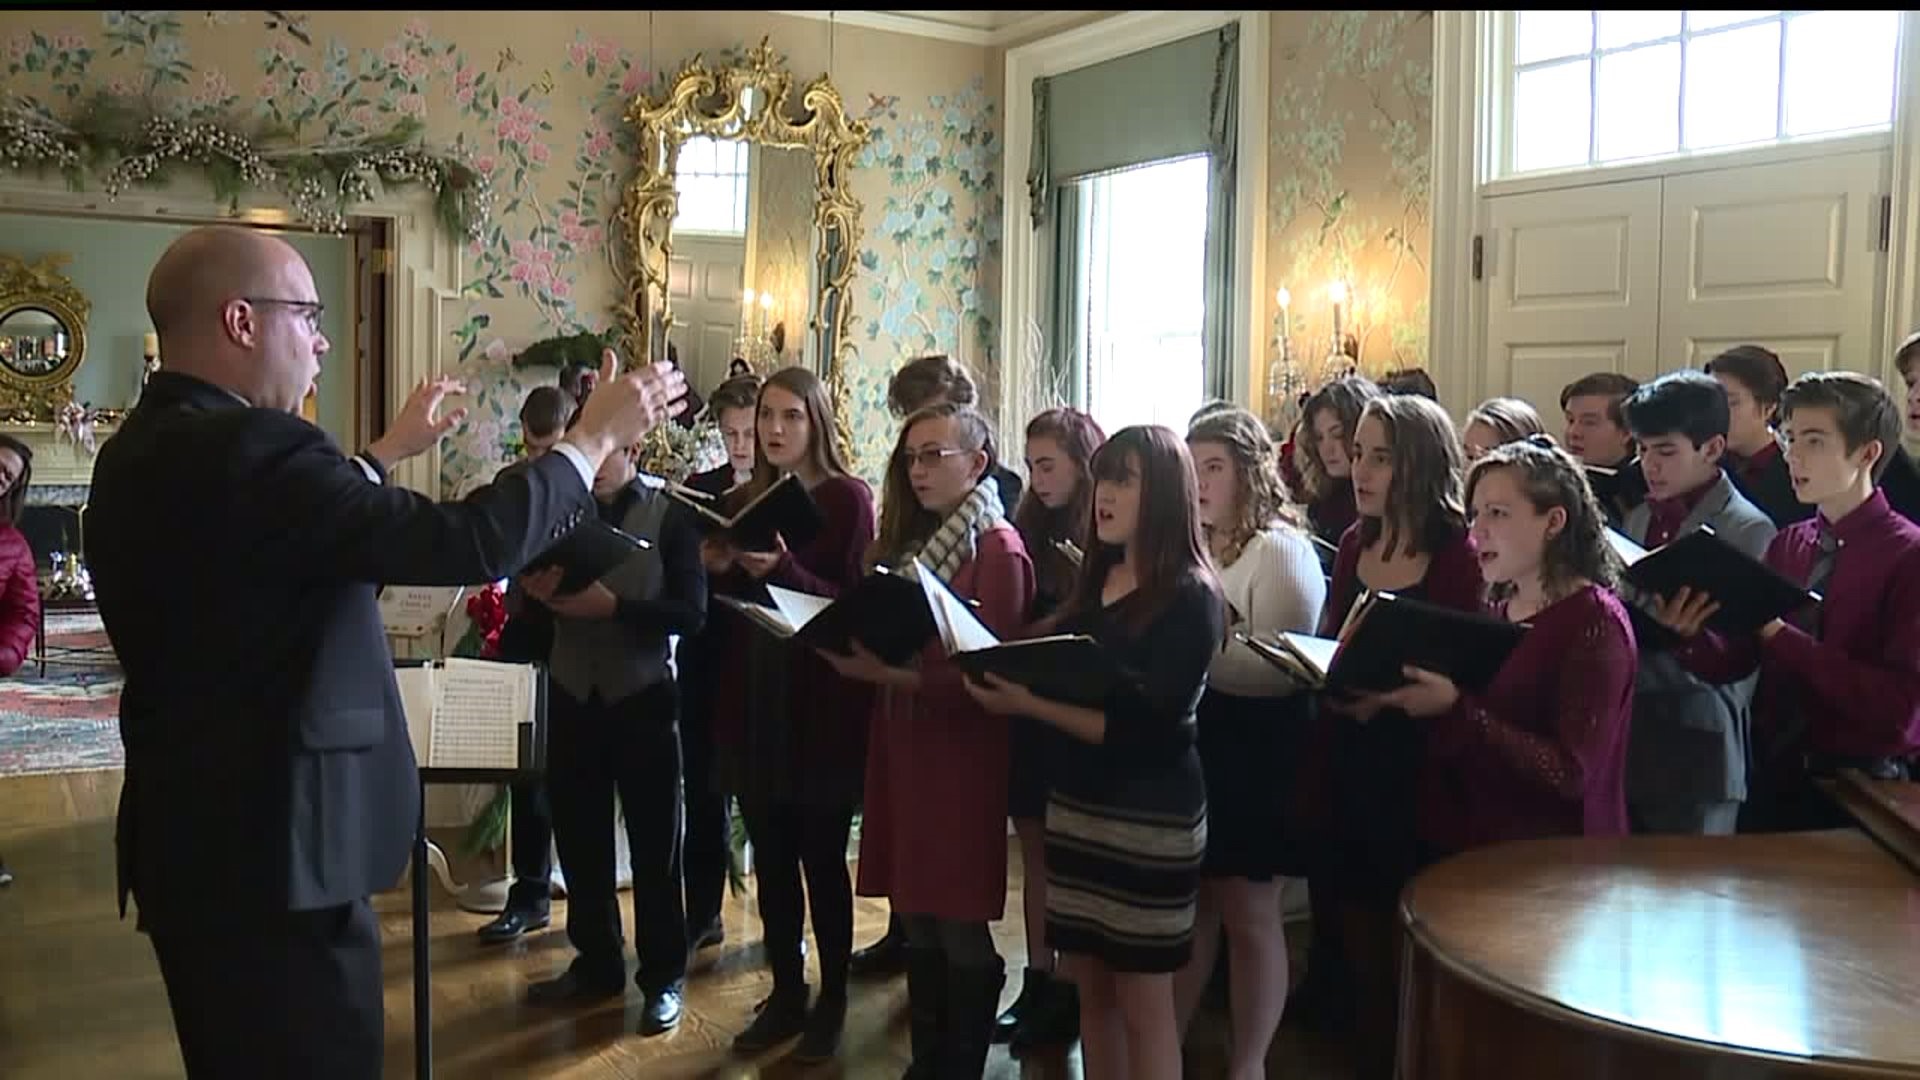 Governor`s residence holds annual holiday open house